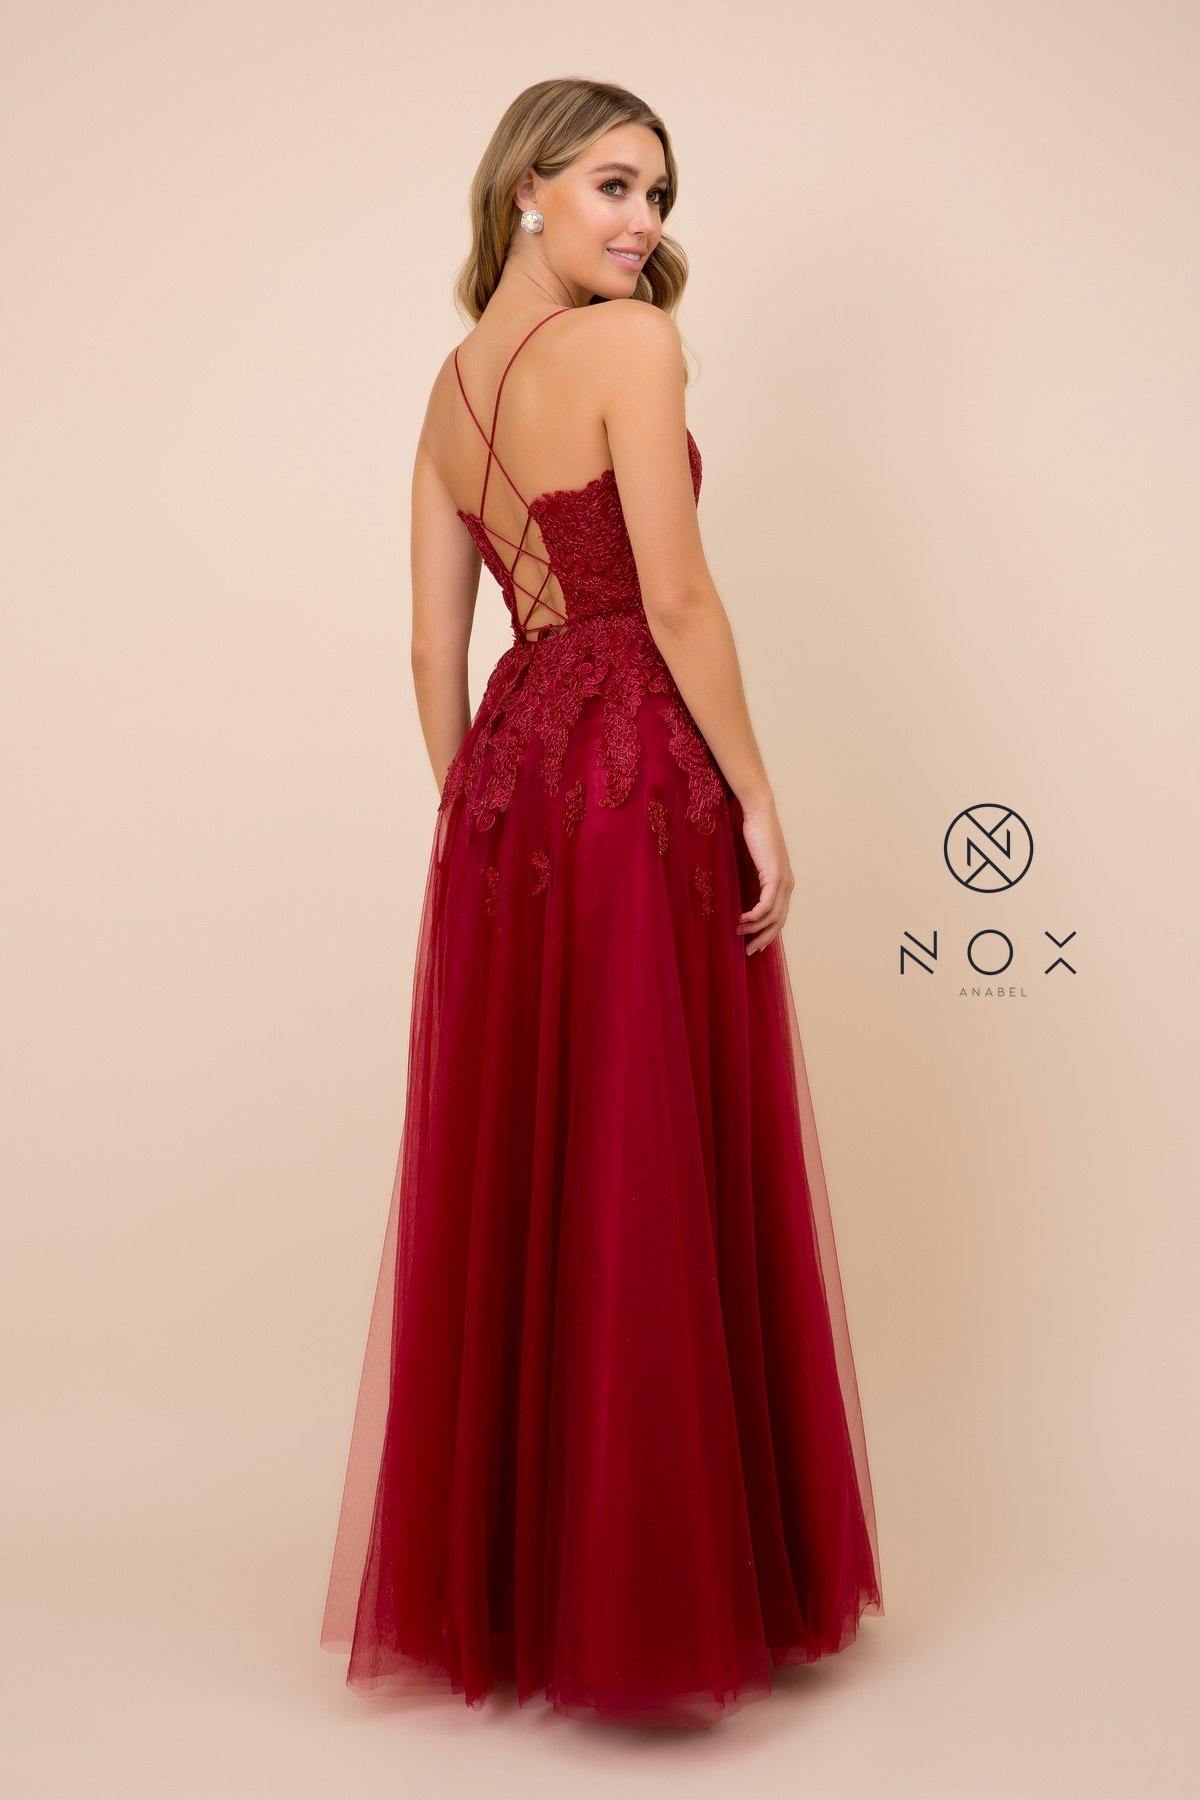 Long Evening Gown Formal Prom Dress - The Dress Outlet Nox Anabel